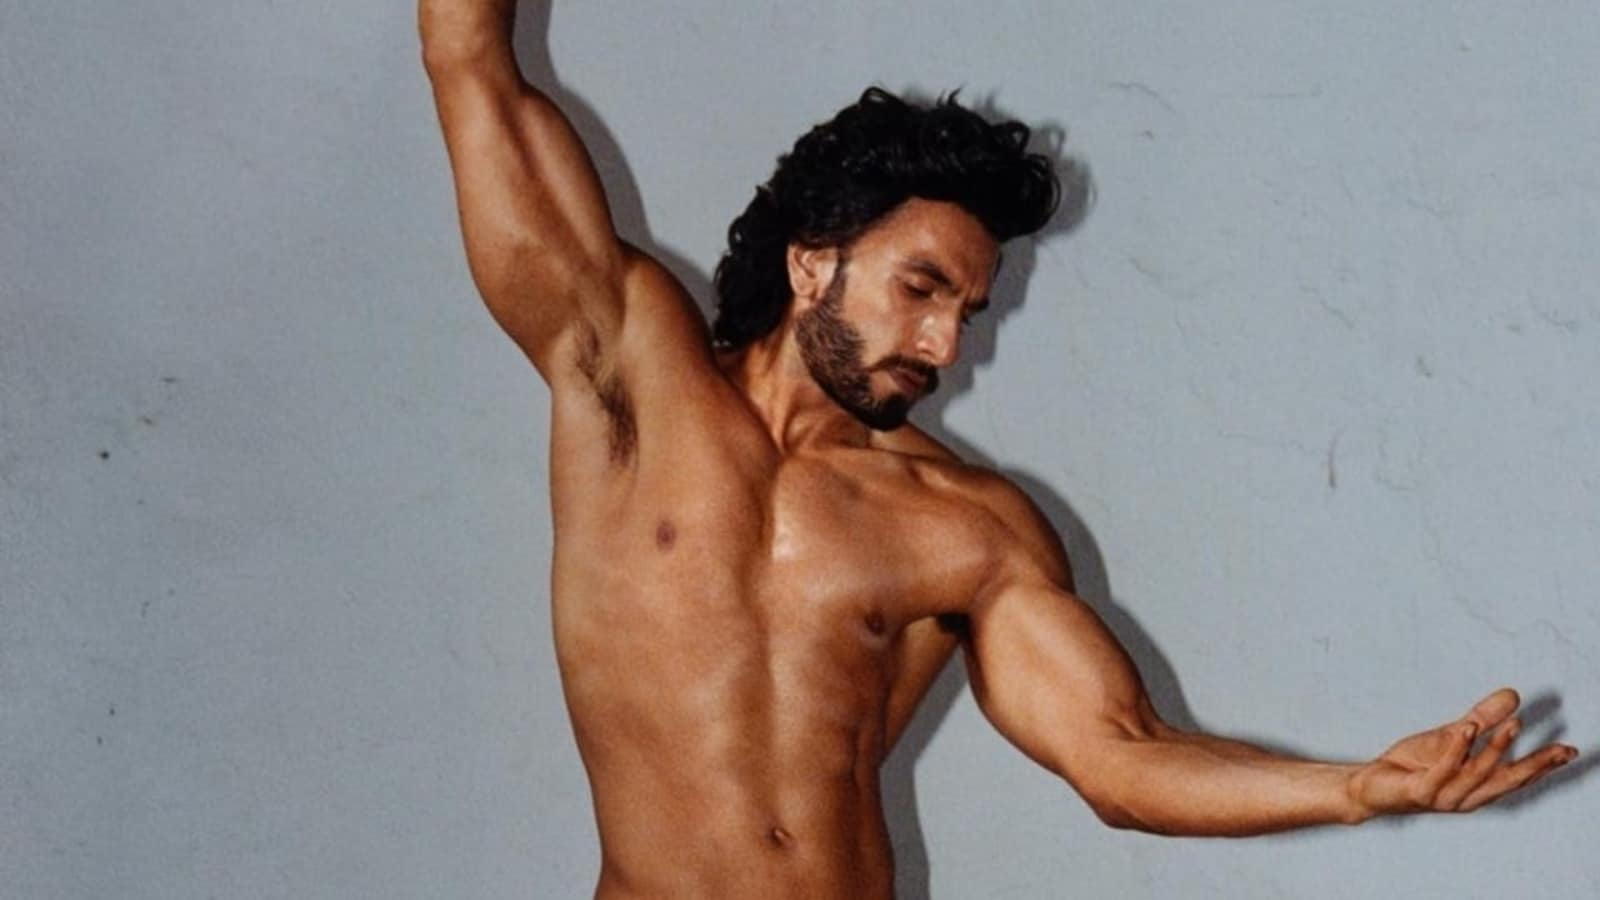 Case filed against Ranveer Singh for a nude photoshoot; everything you need...